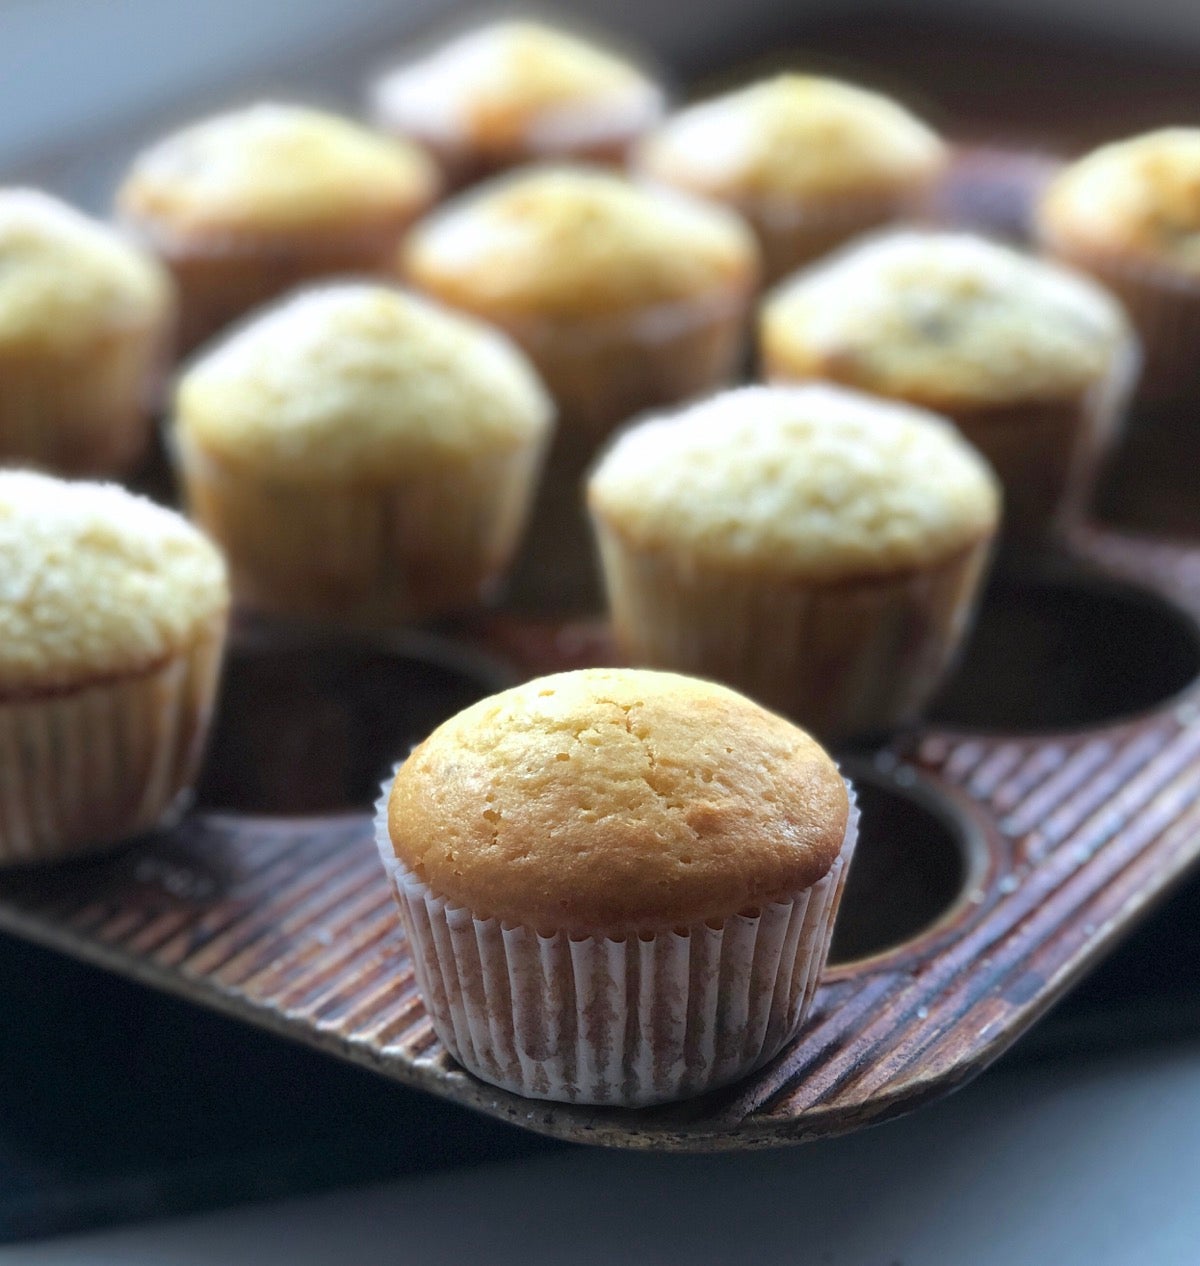 Muffins made with Baking Sugar Alternative cooling atop a muffin pan.